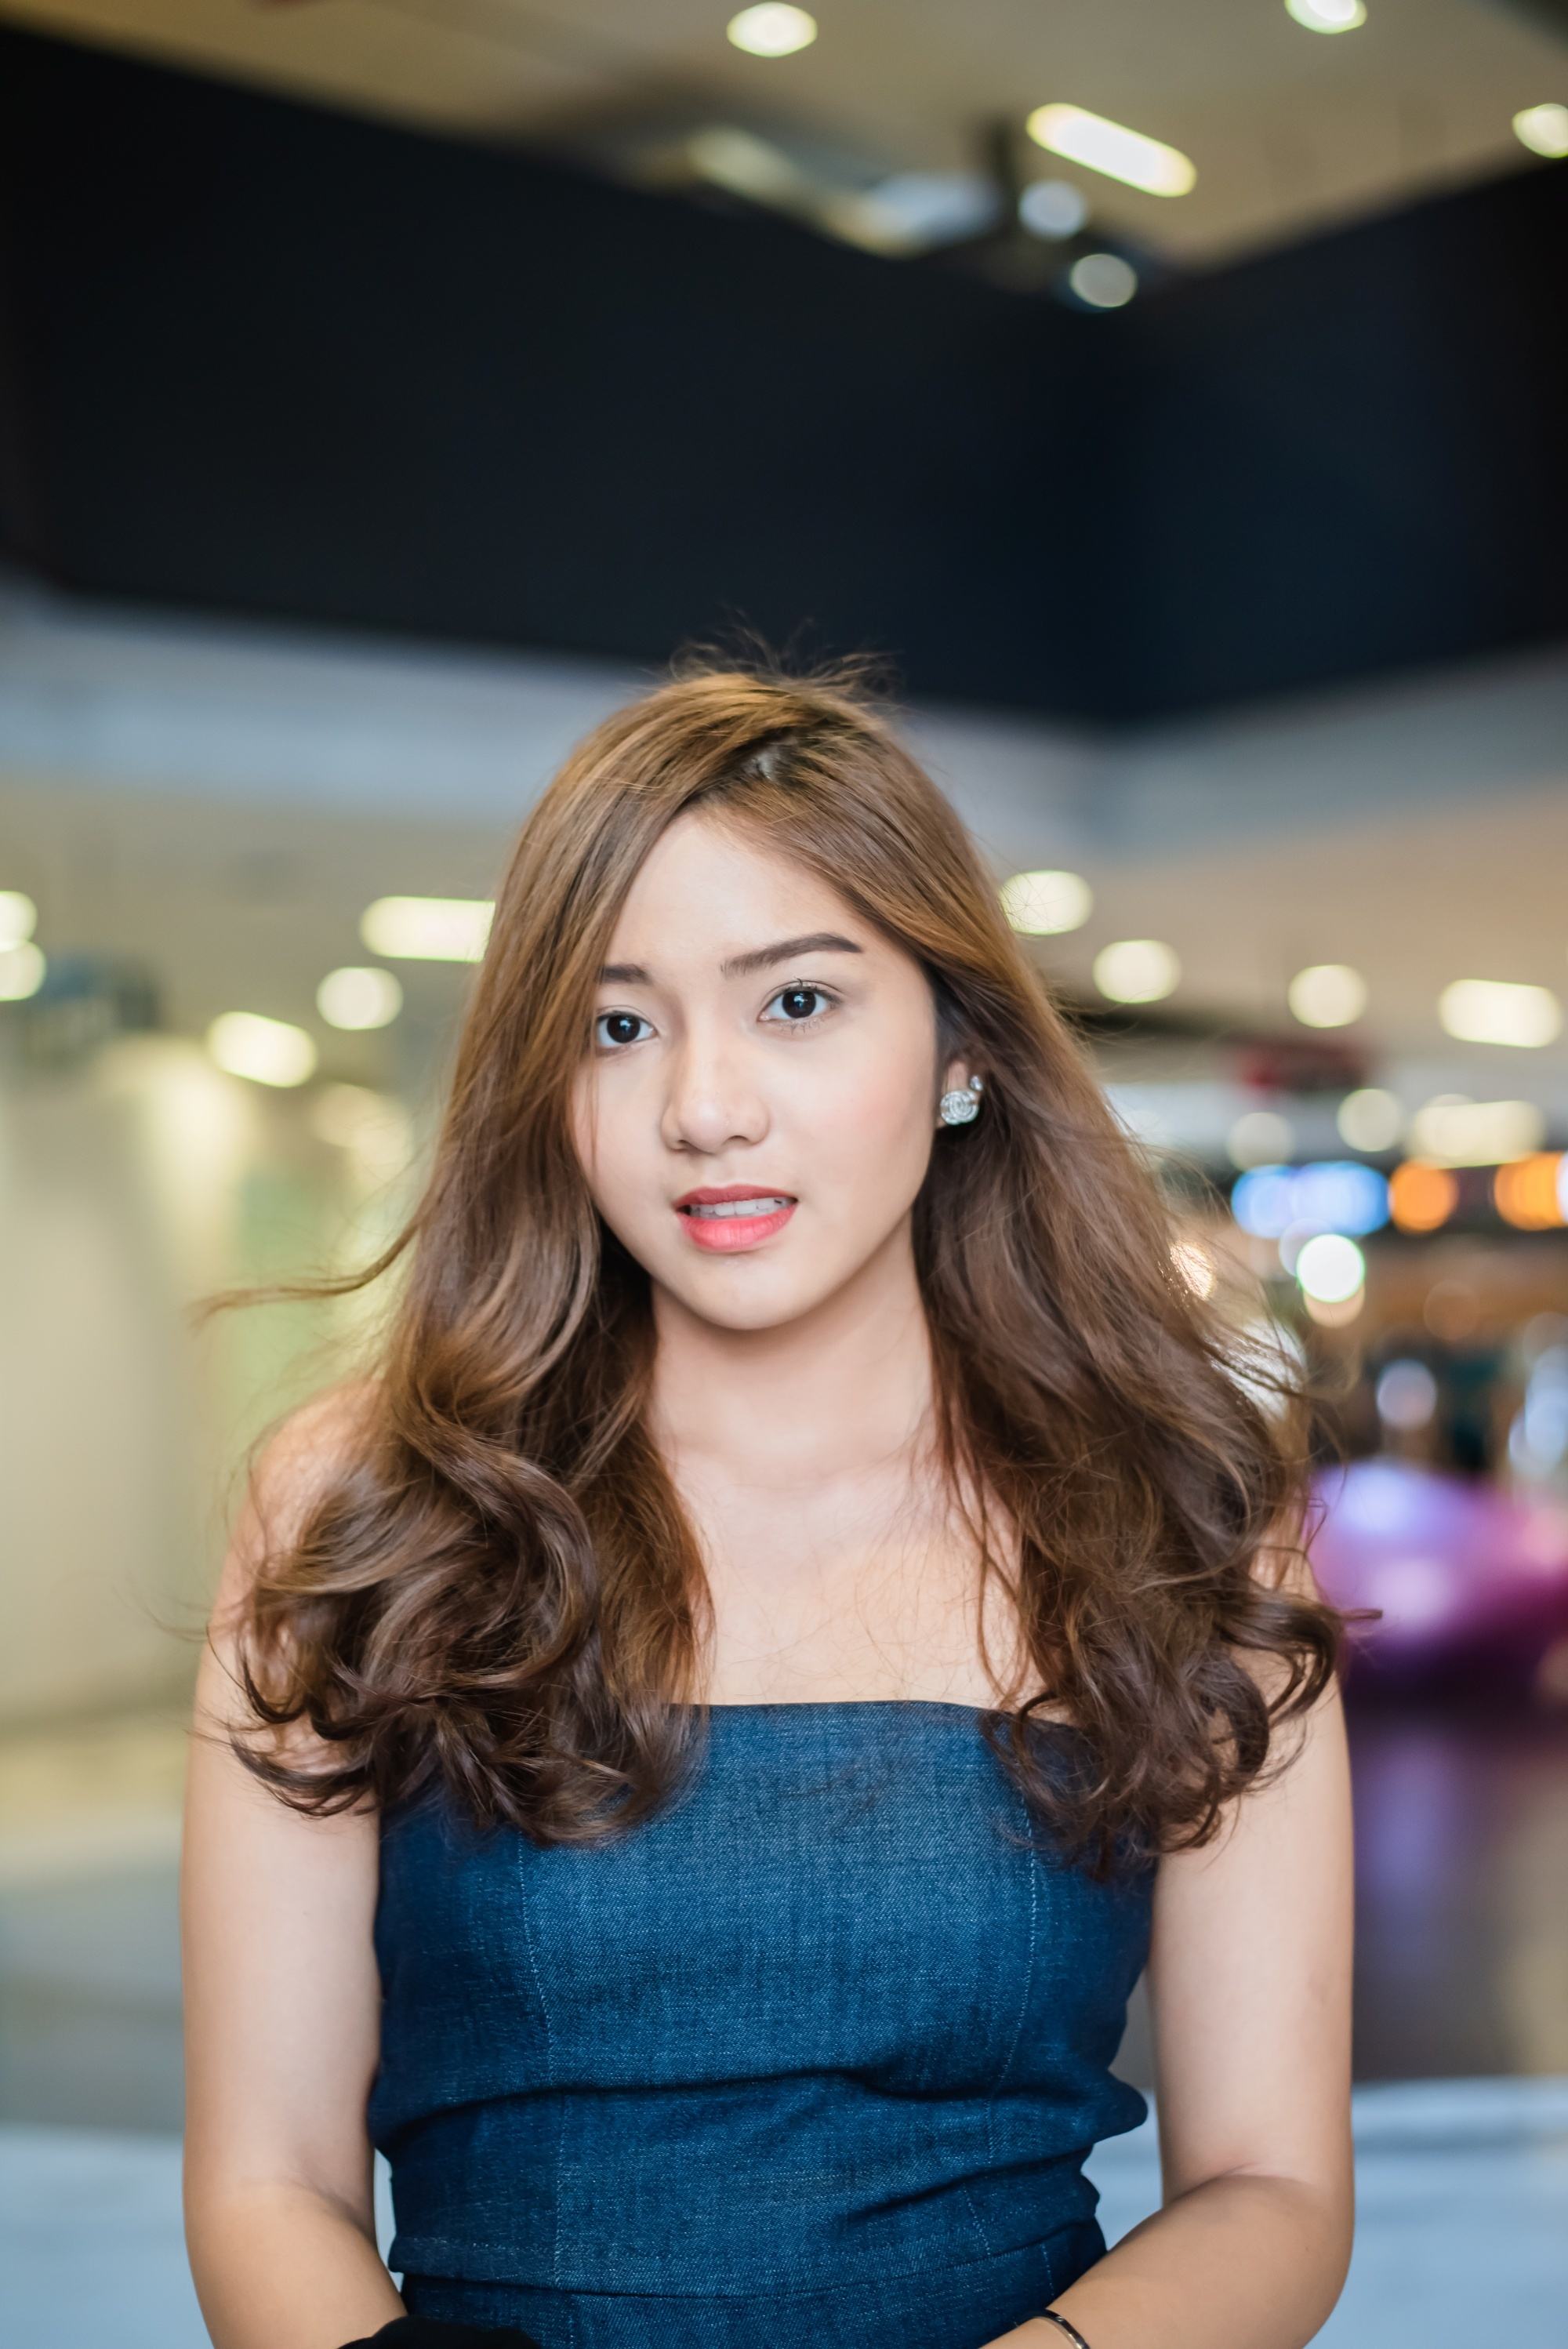 Asian woman with chocolate brown hair color wearing a teal dress